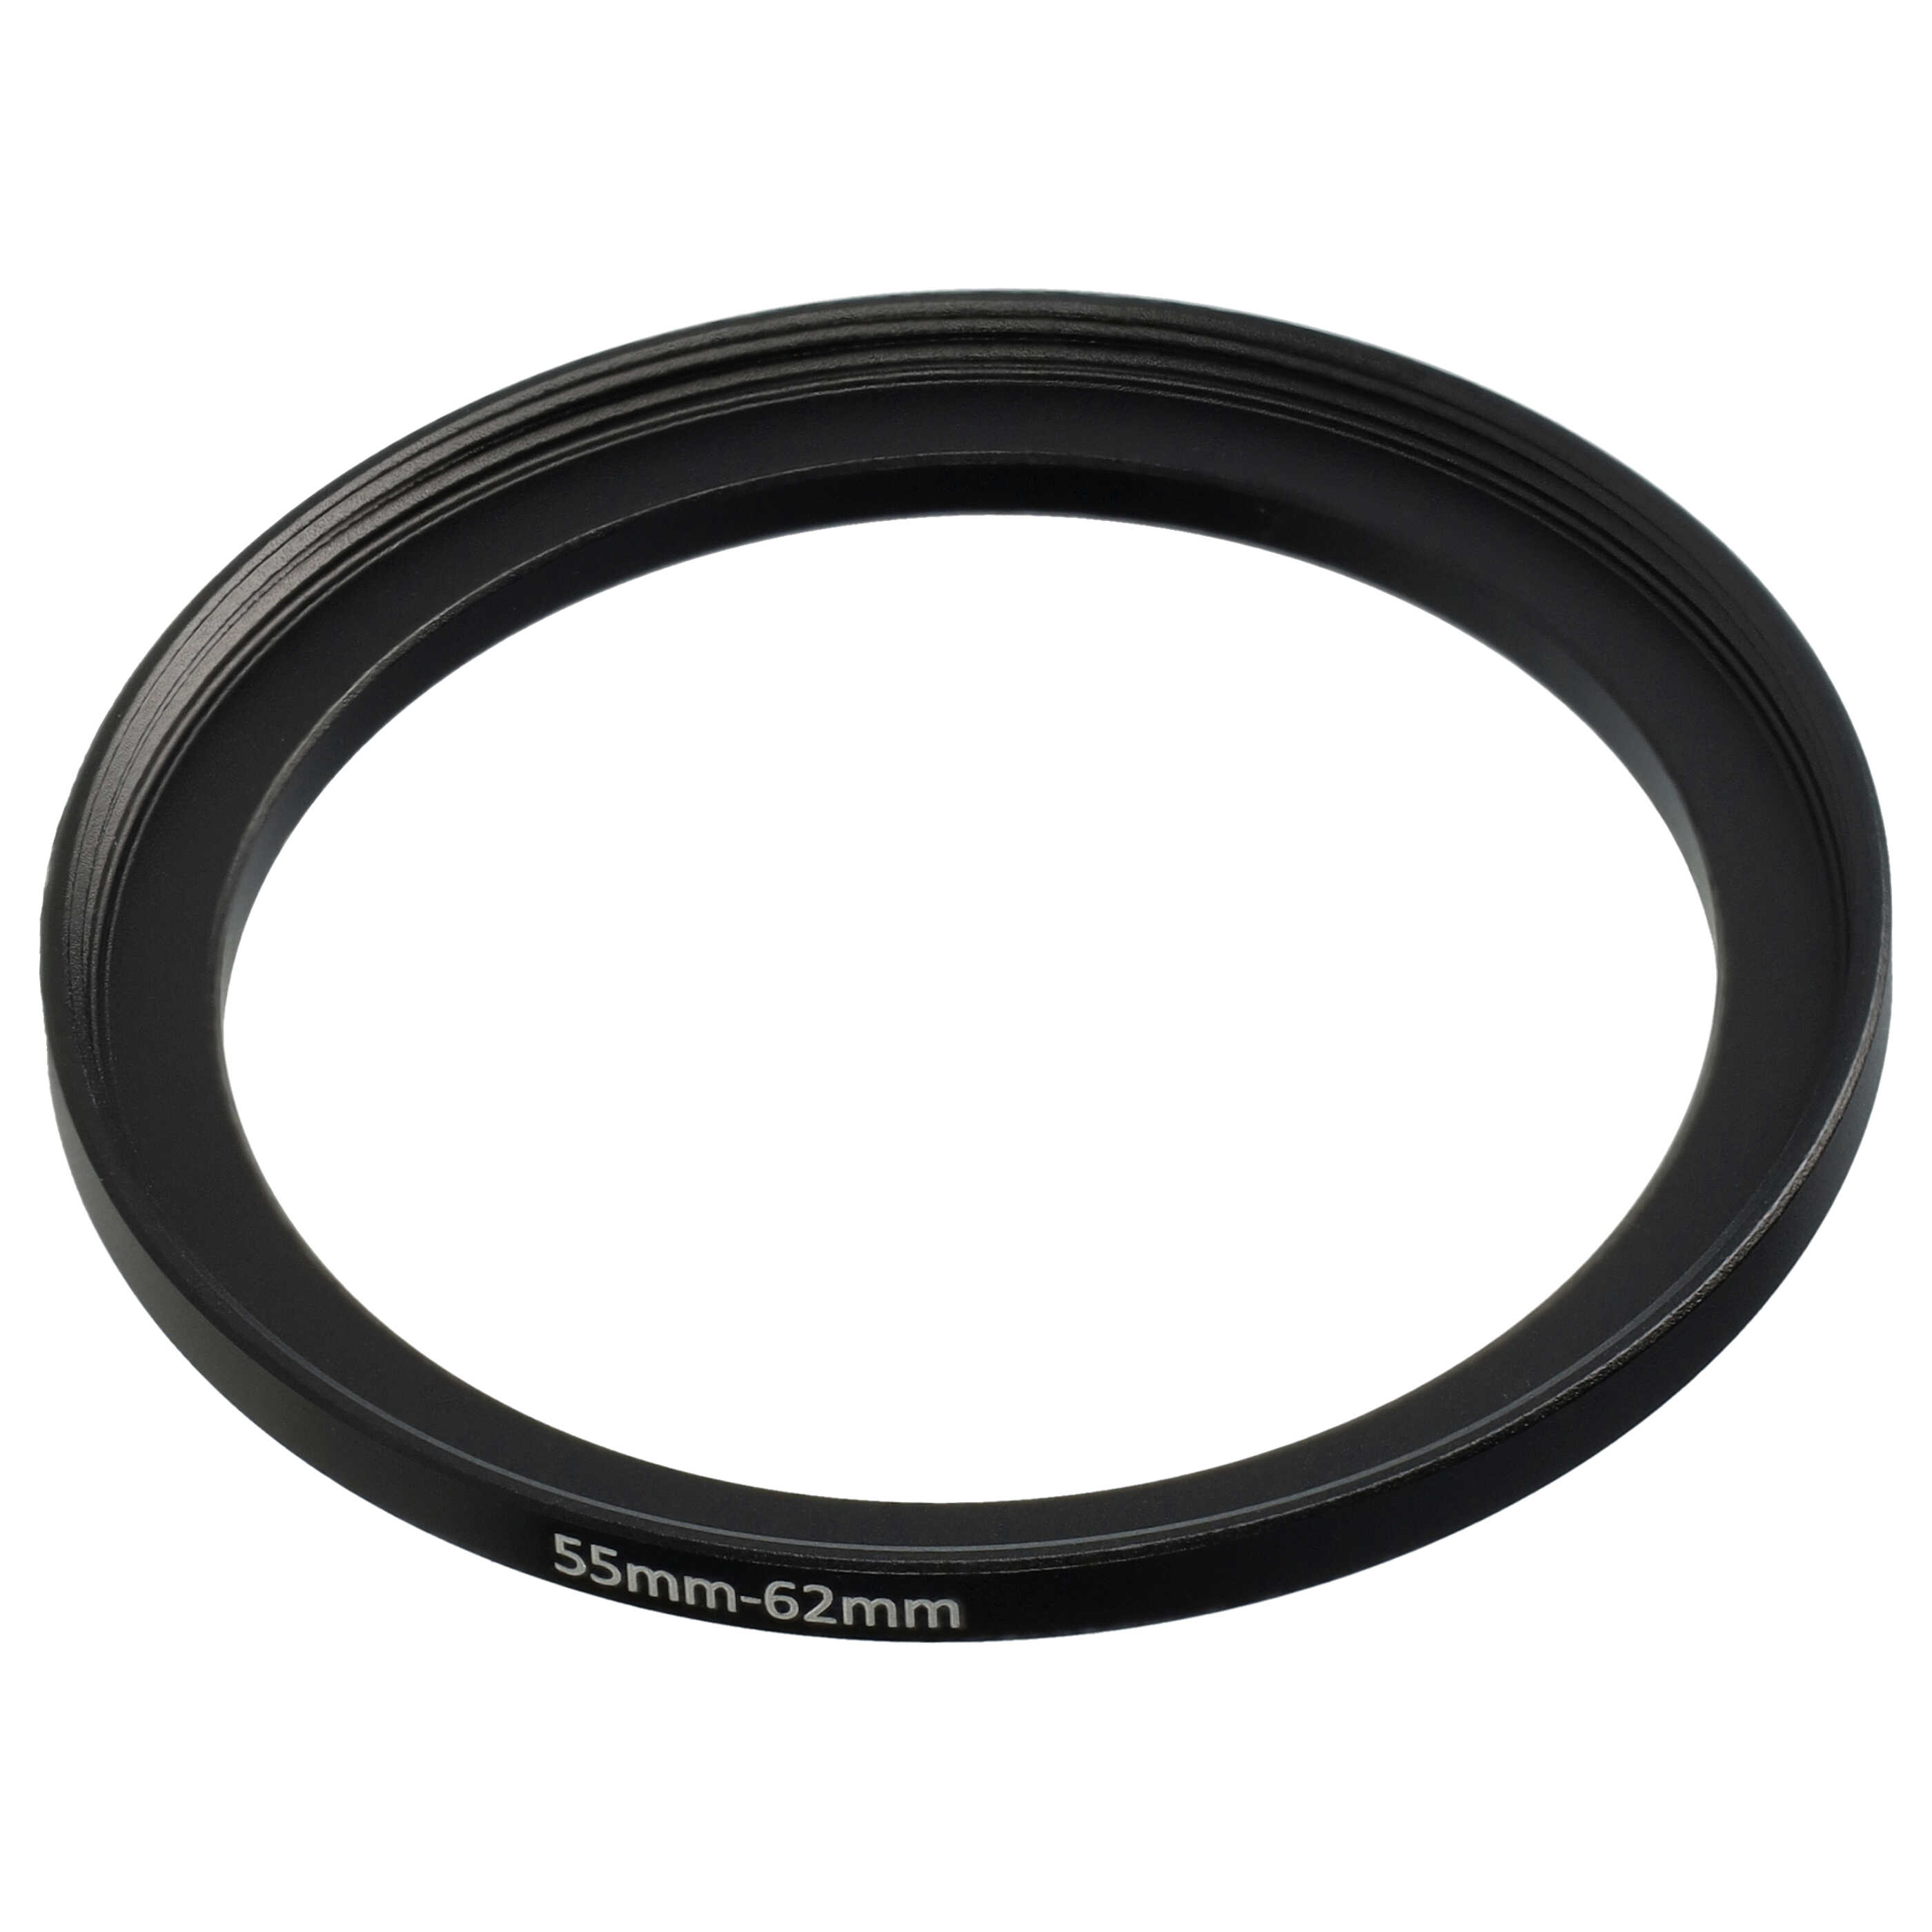 Step-Up Ring Adapter of 55 mm to 62 mmfor various Camera Lens - Filter Adapter